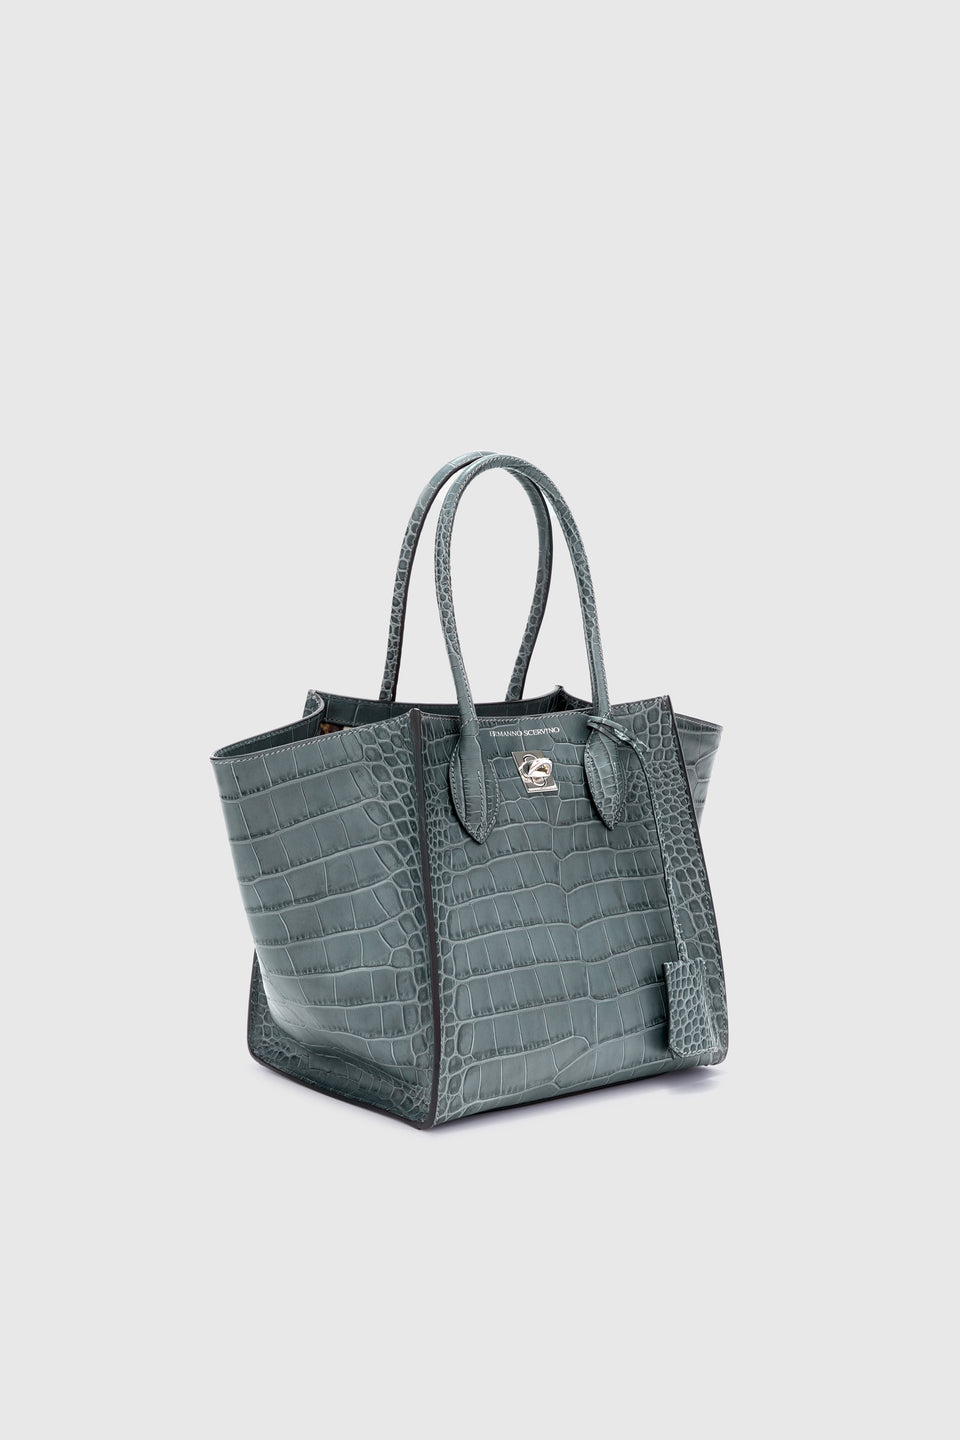 Gray leather tote bag